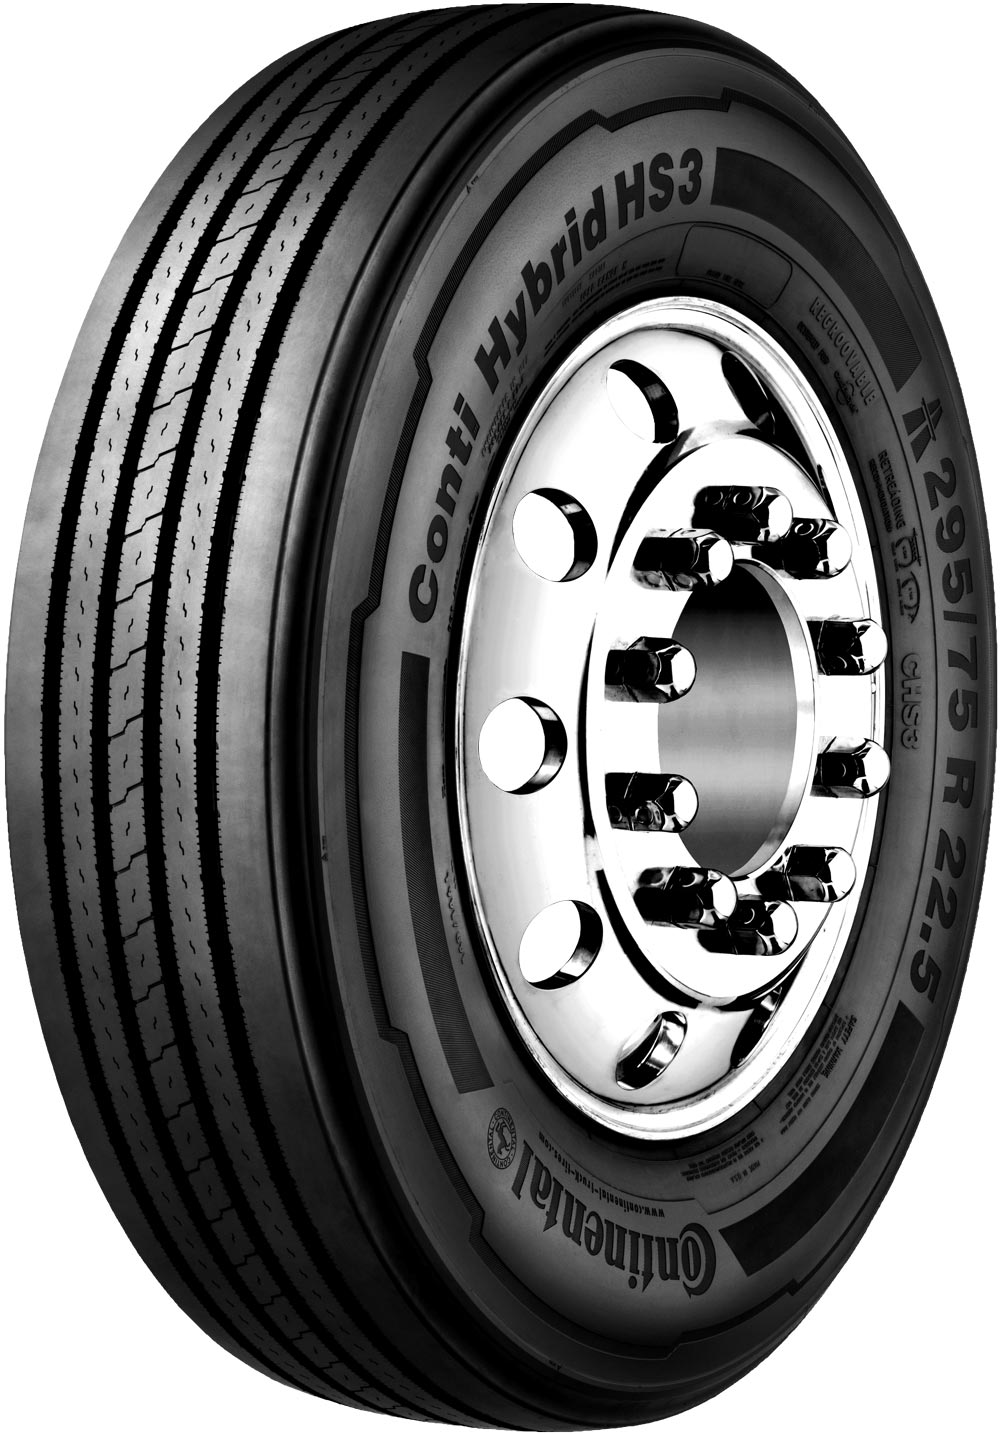 product_type-heavy_tires CONTINENTAL Conti Hybrid HS3 245/70 R19.5 136M